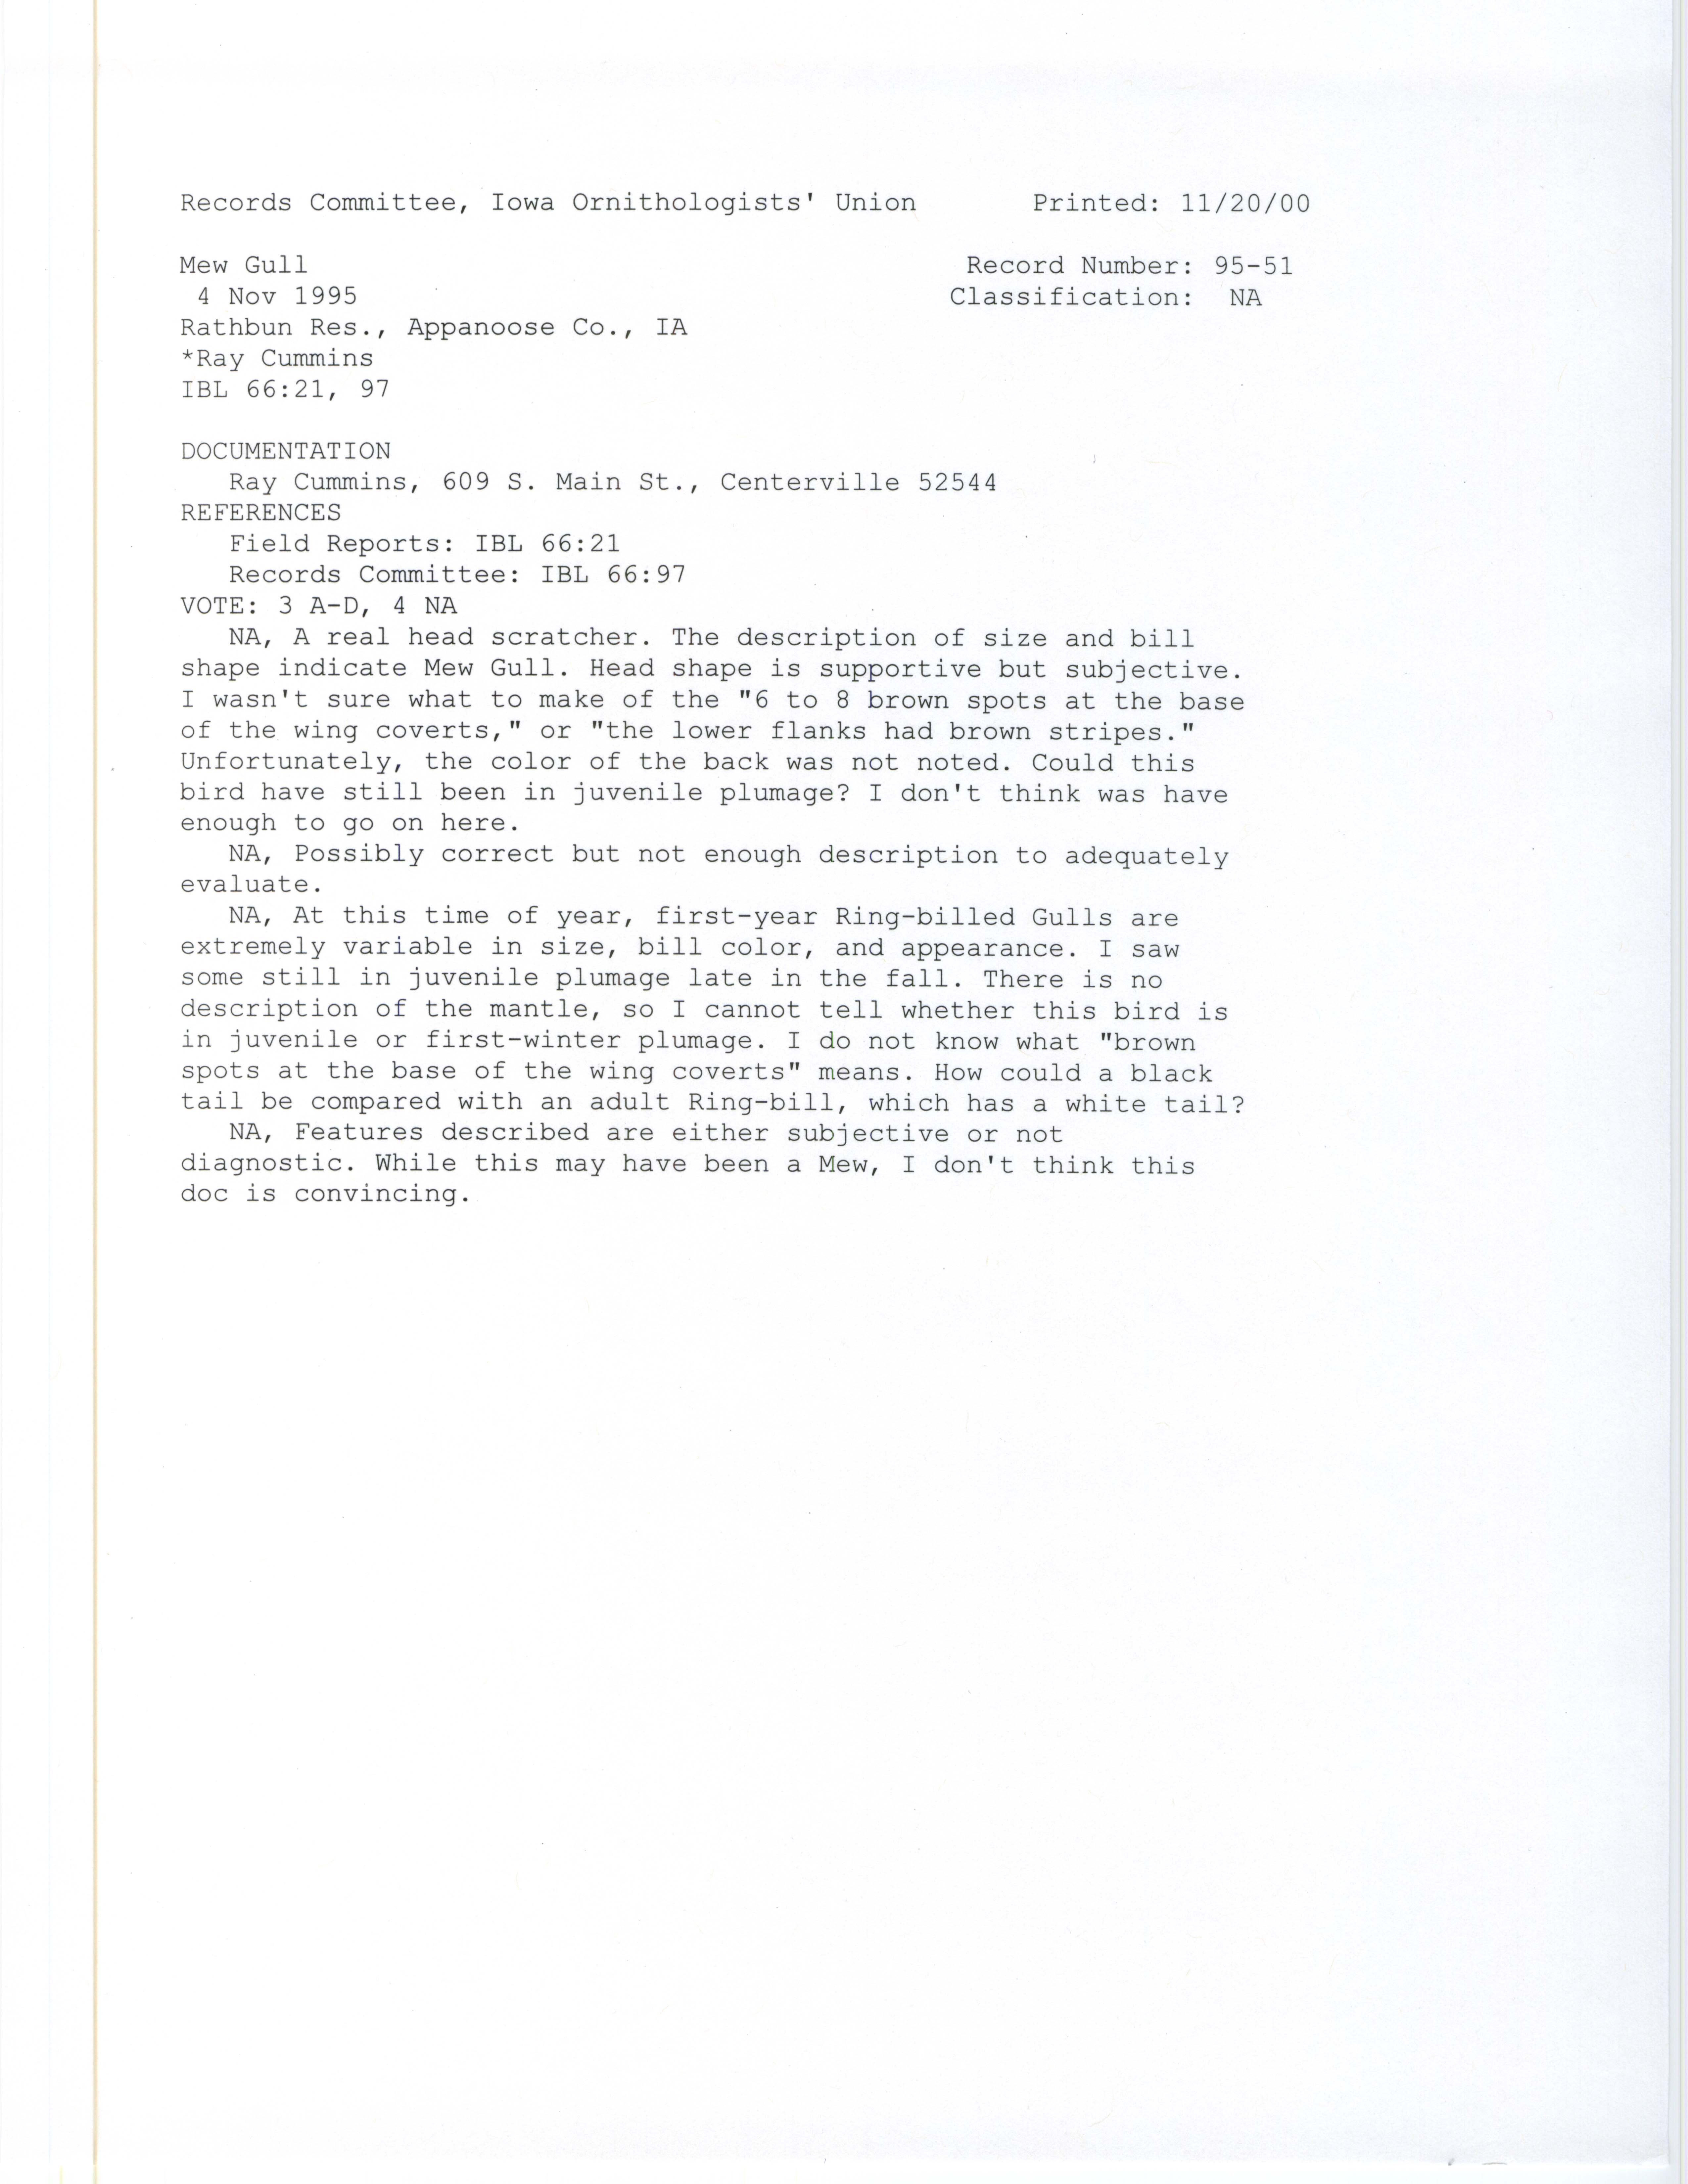 Records Committee review for rare bird sighting of Mew Gull at Lake Rathbun, 1995